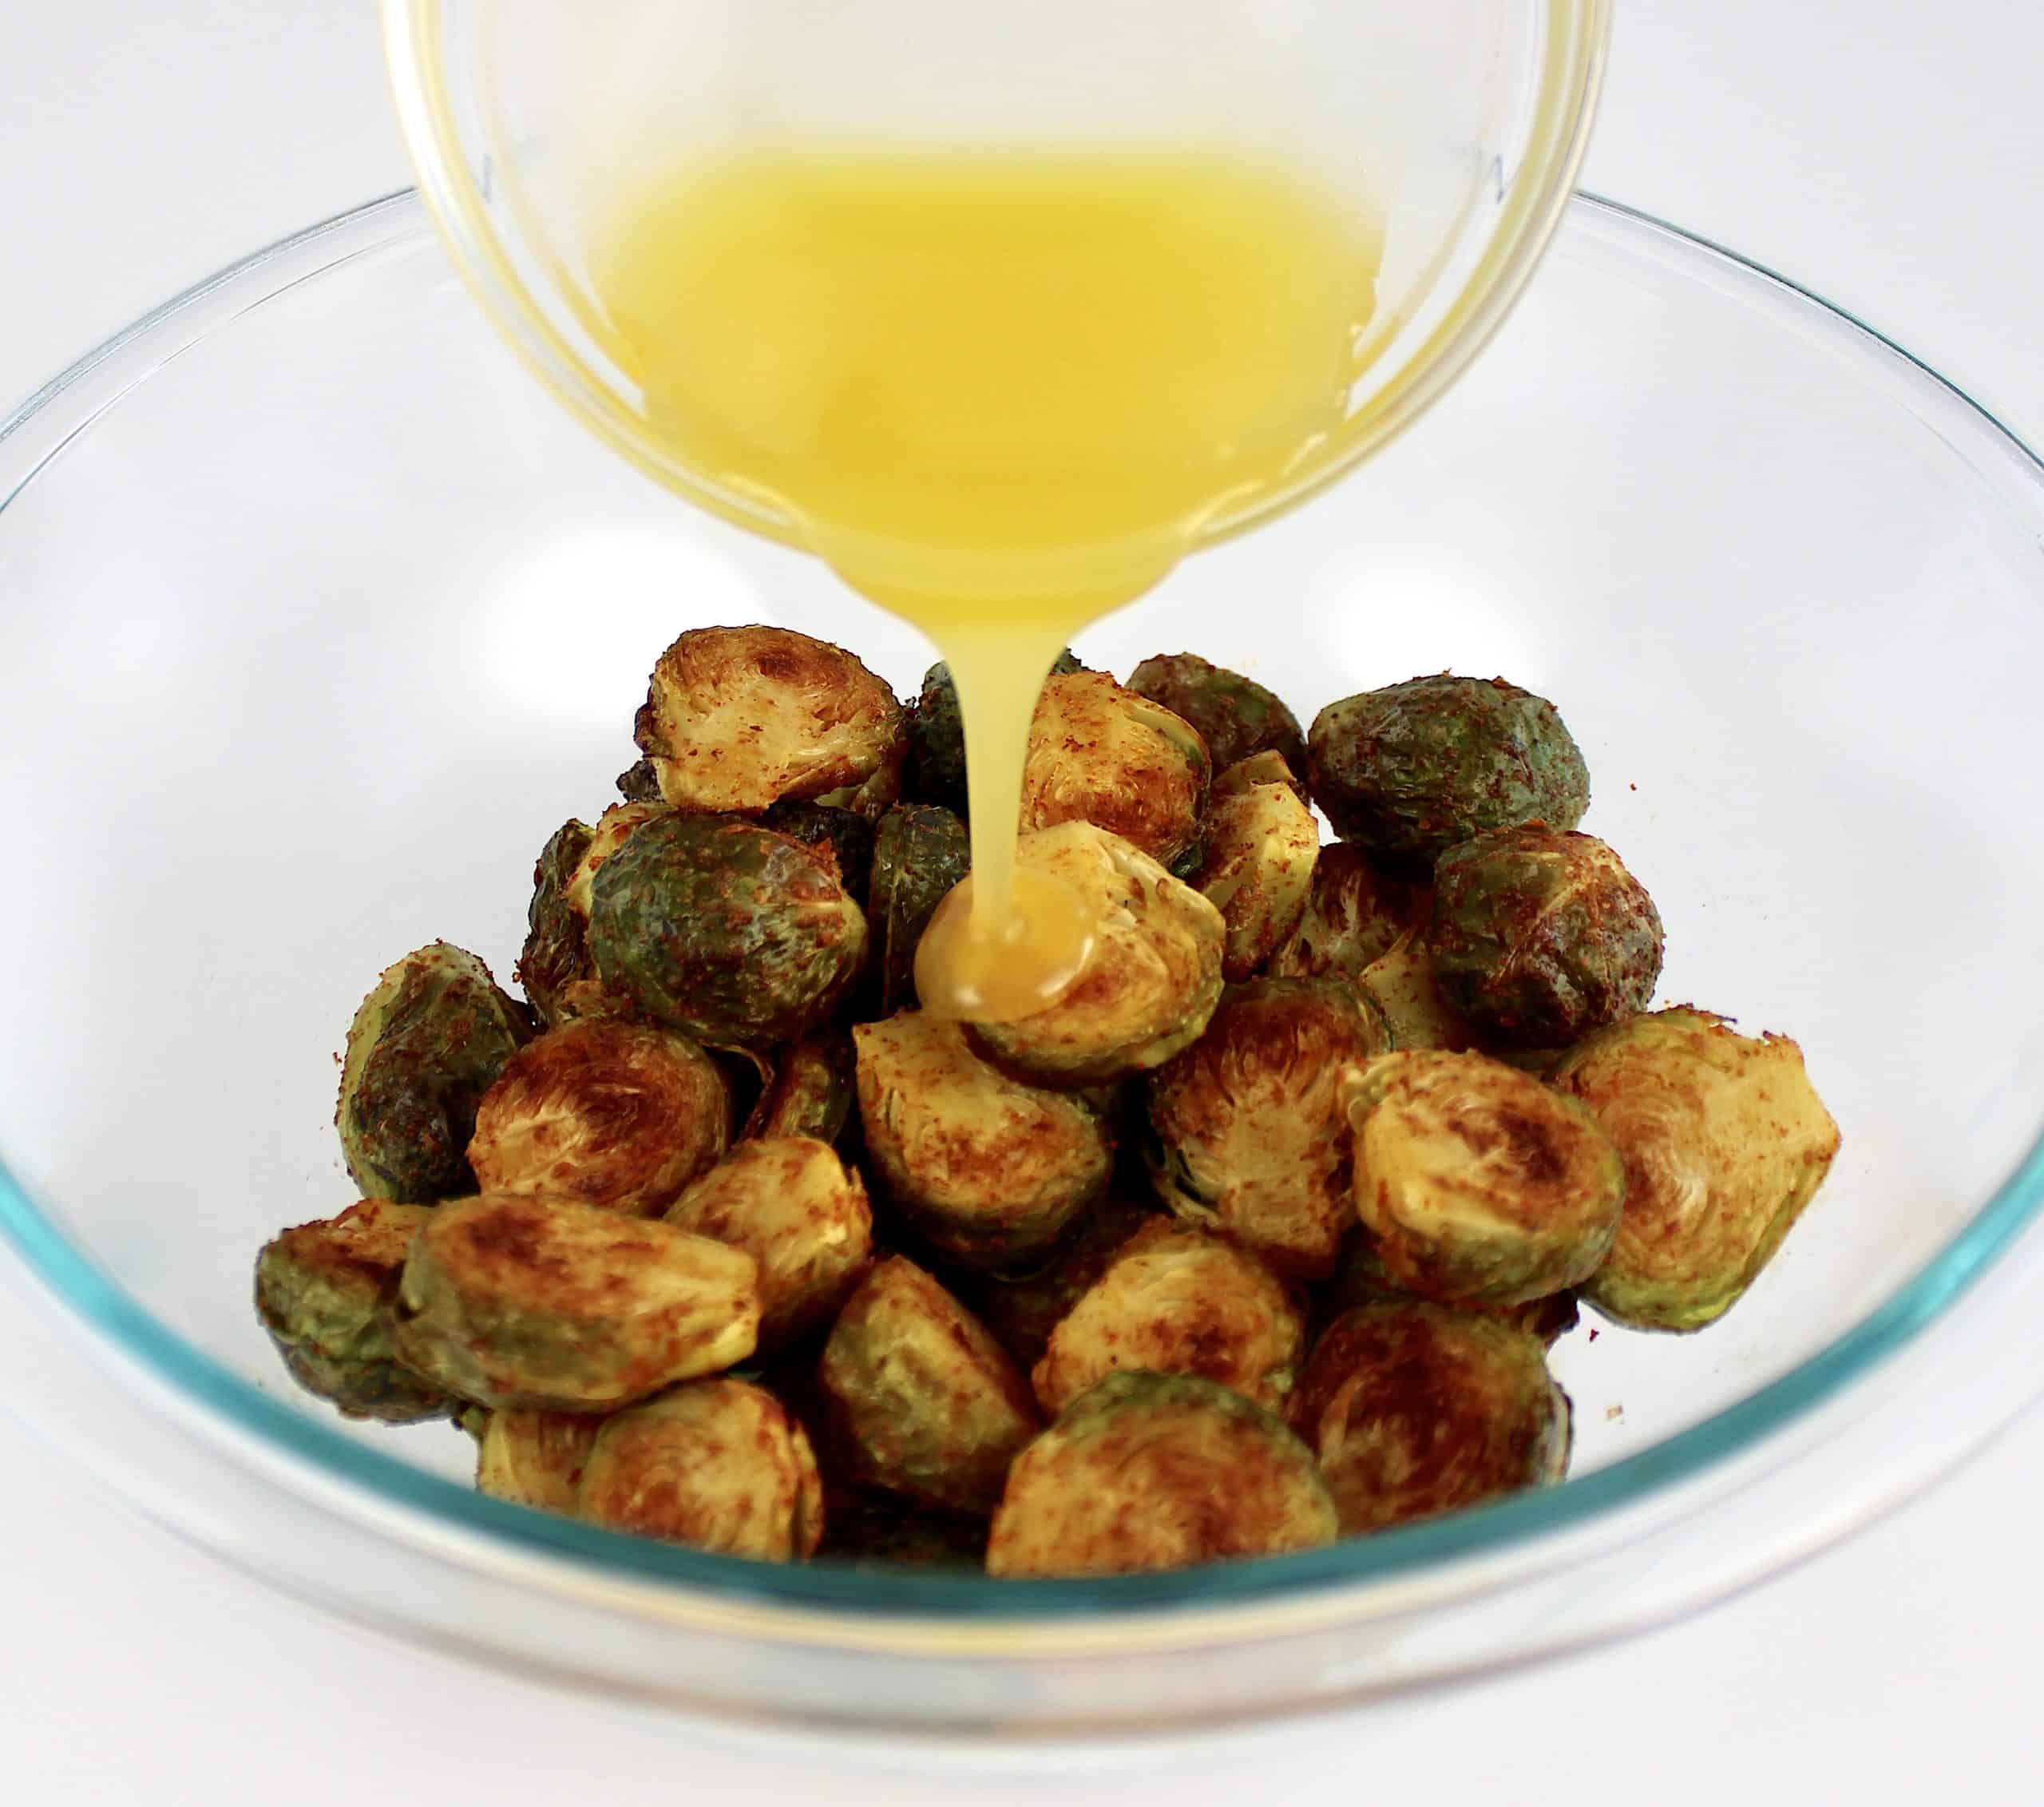 honey butter being poured over roasted brussels sprouts in glass bowl